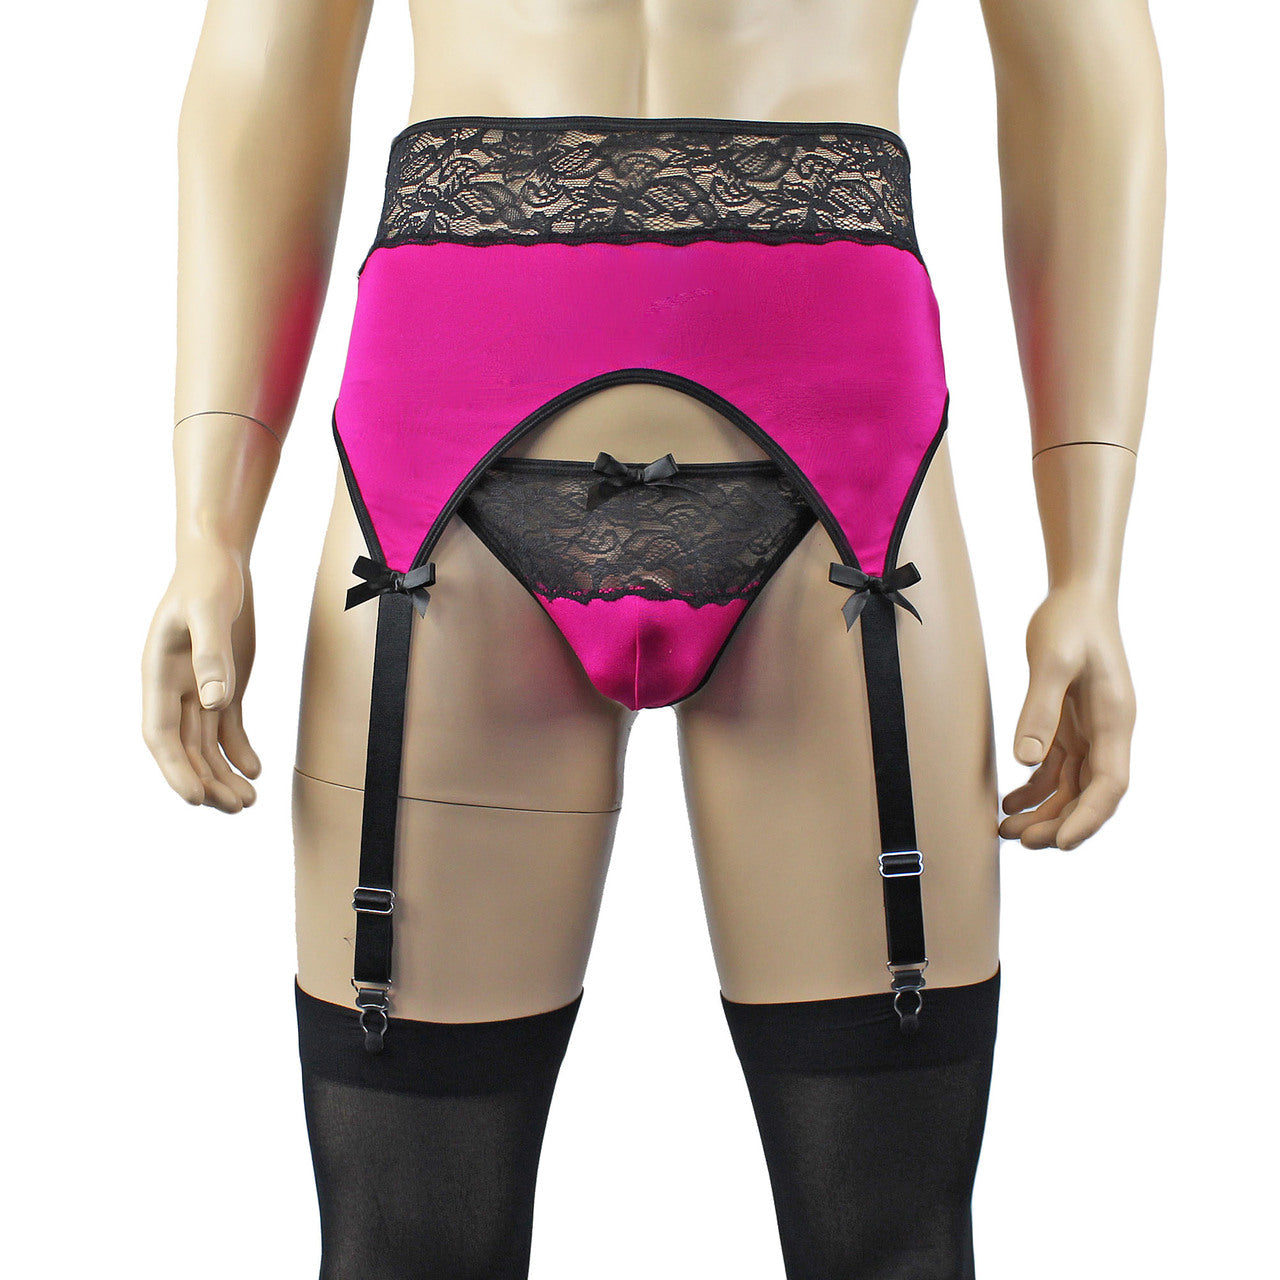 Mens Glamour Lycra & lace High Cut Garterbelt, G string & Stockings (raspberry plus other colours)